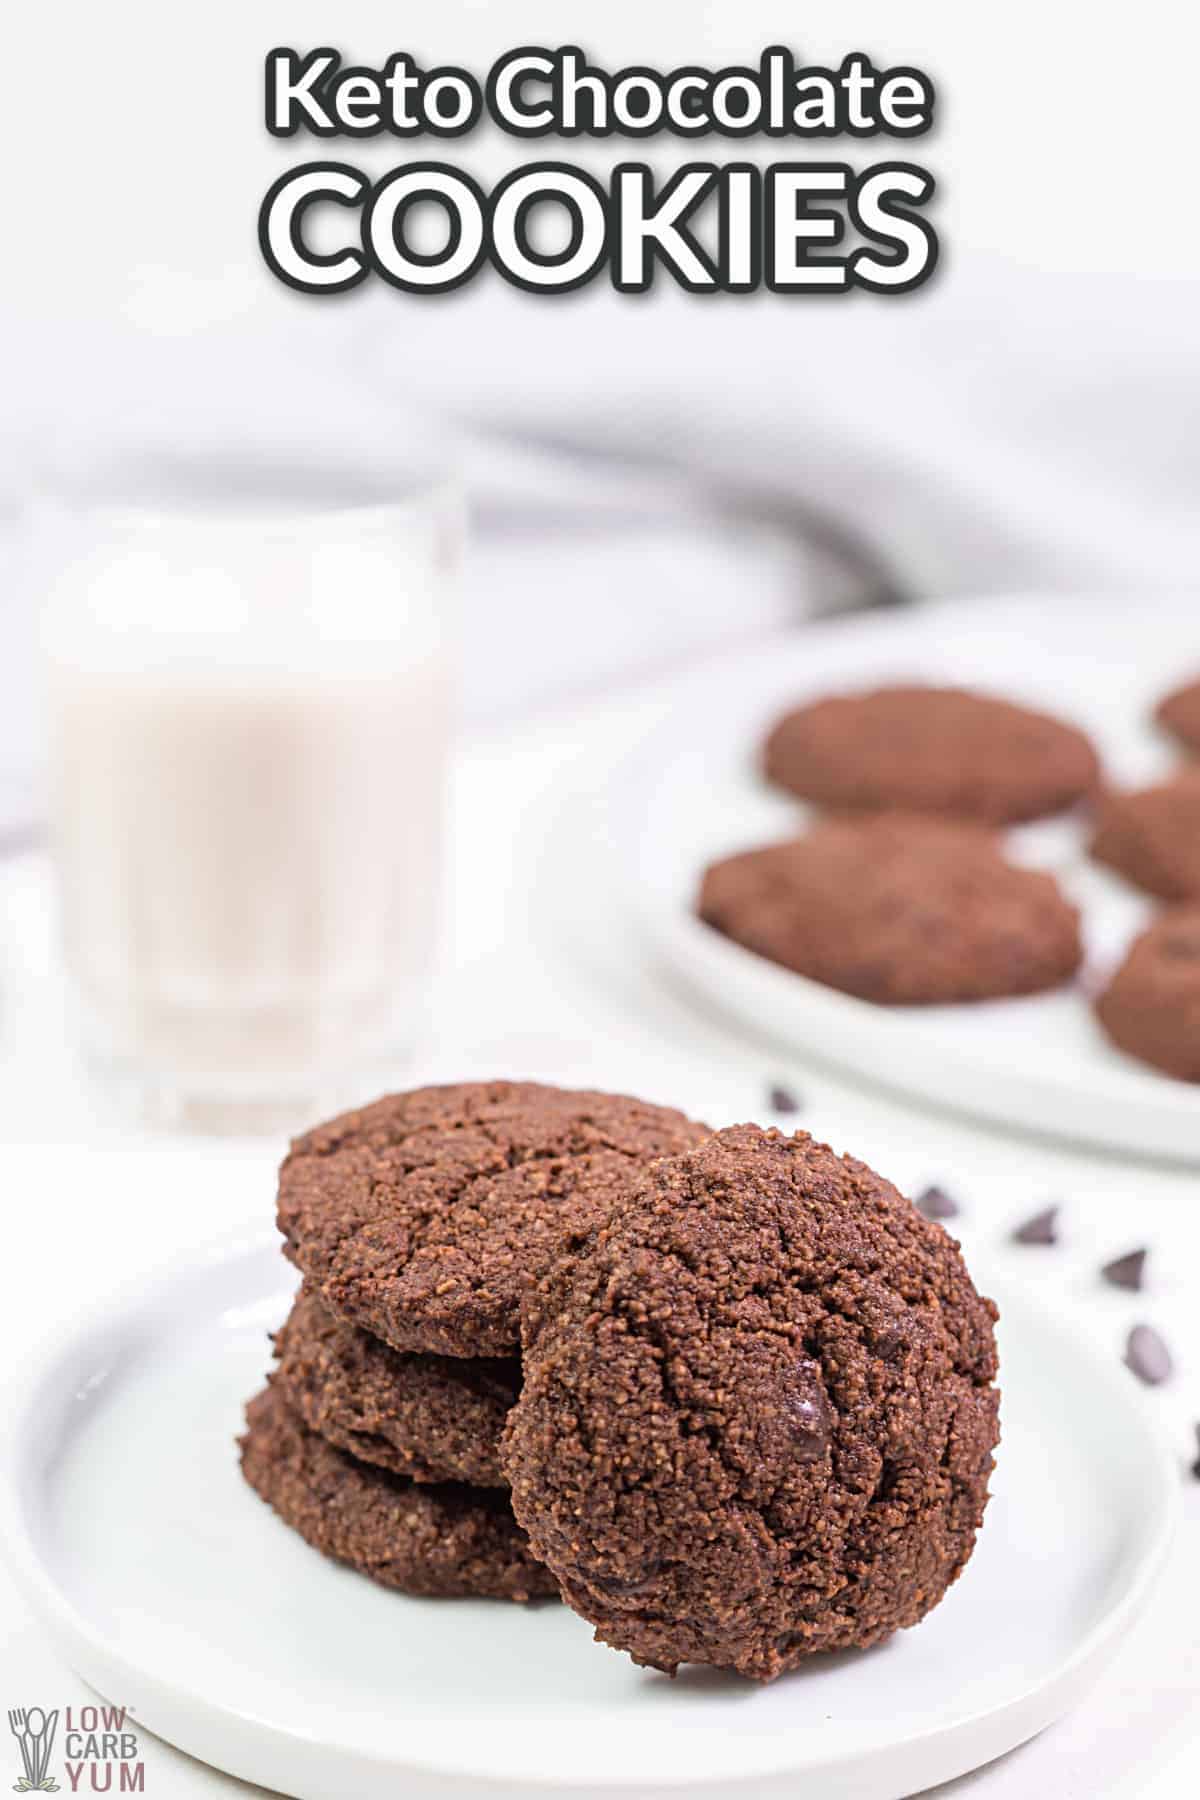 keto chocolate cookies with text overlay.